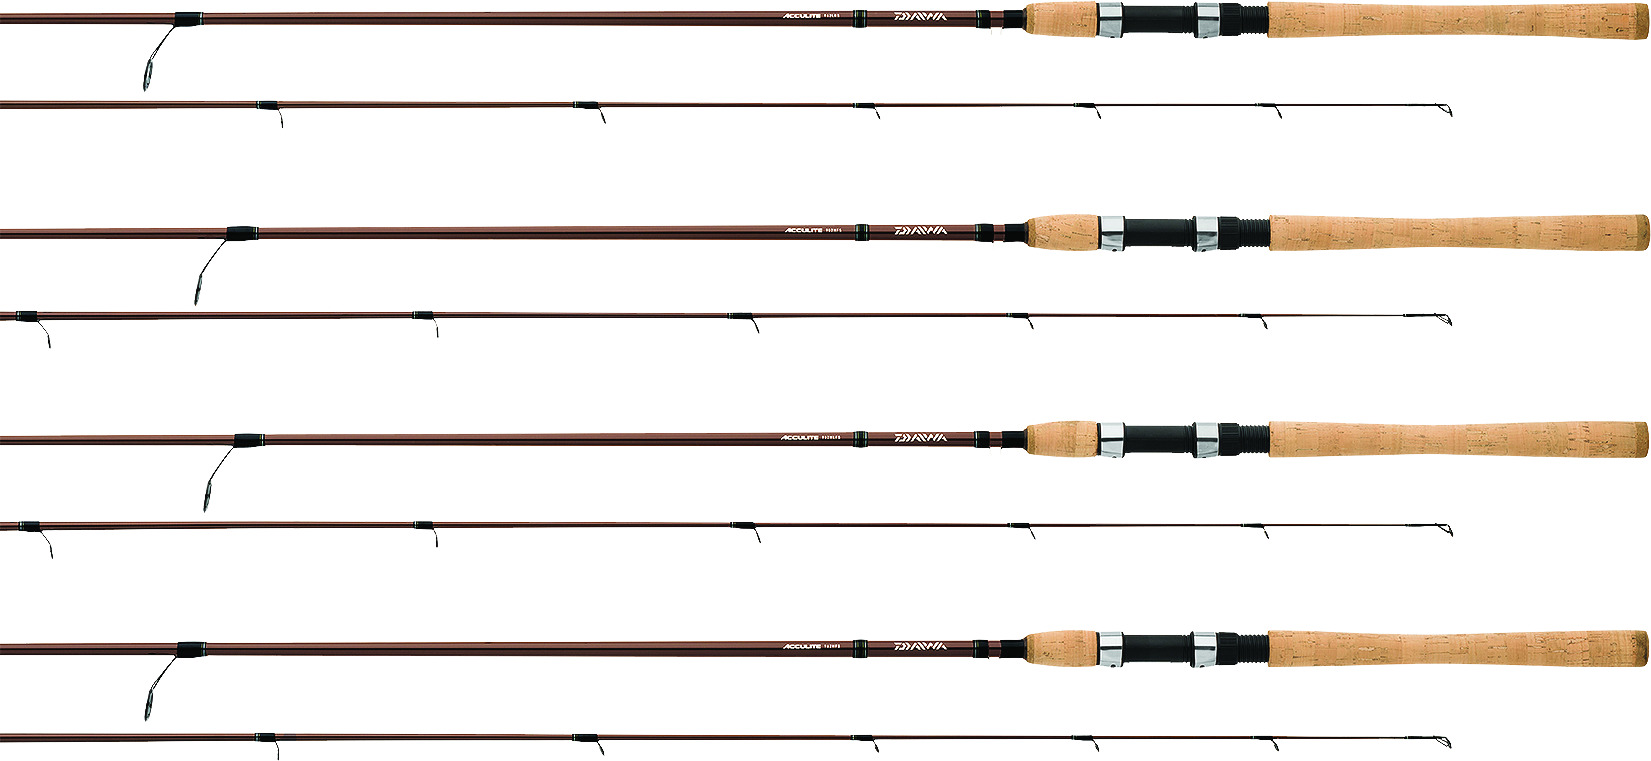 Daiwa Acculite Spinning Rod, 2 Piece, Fast, Medium, 3/8-1oz Lures, 8lb -  17lb, 8 Guides , Up to $4.00 Off with Free S&H — CampSaver